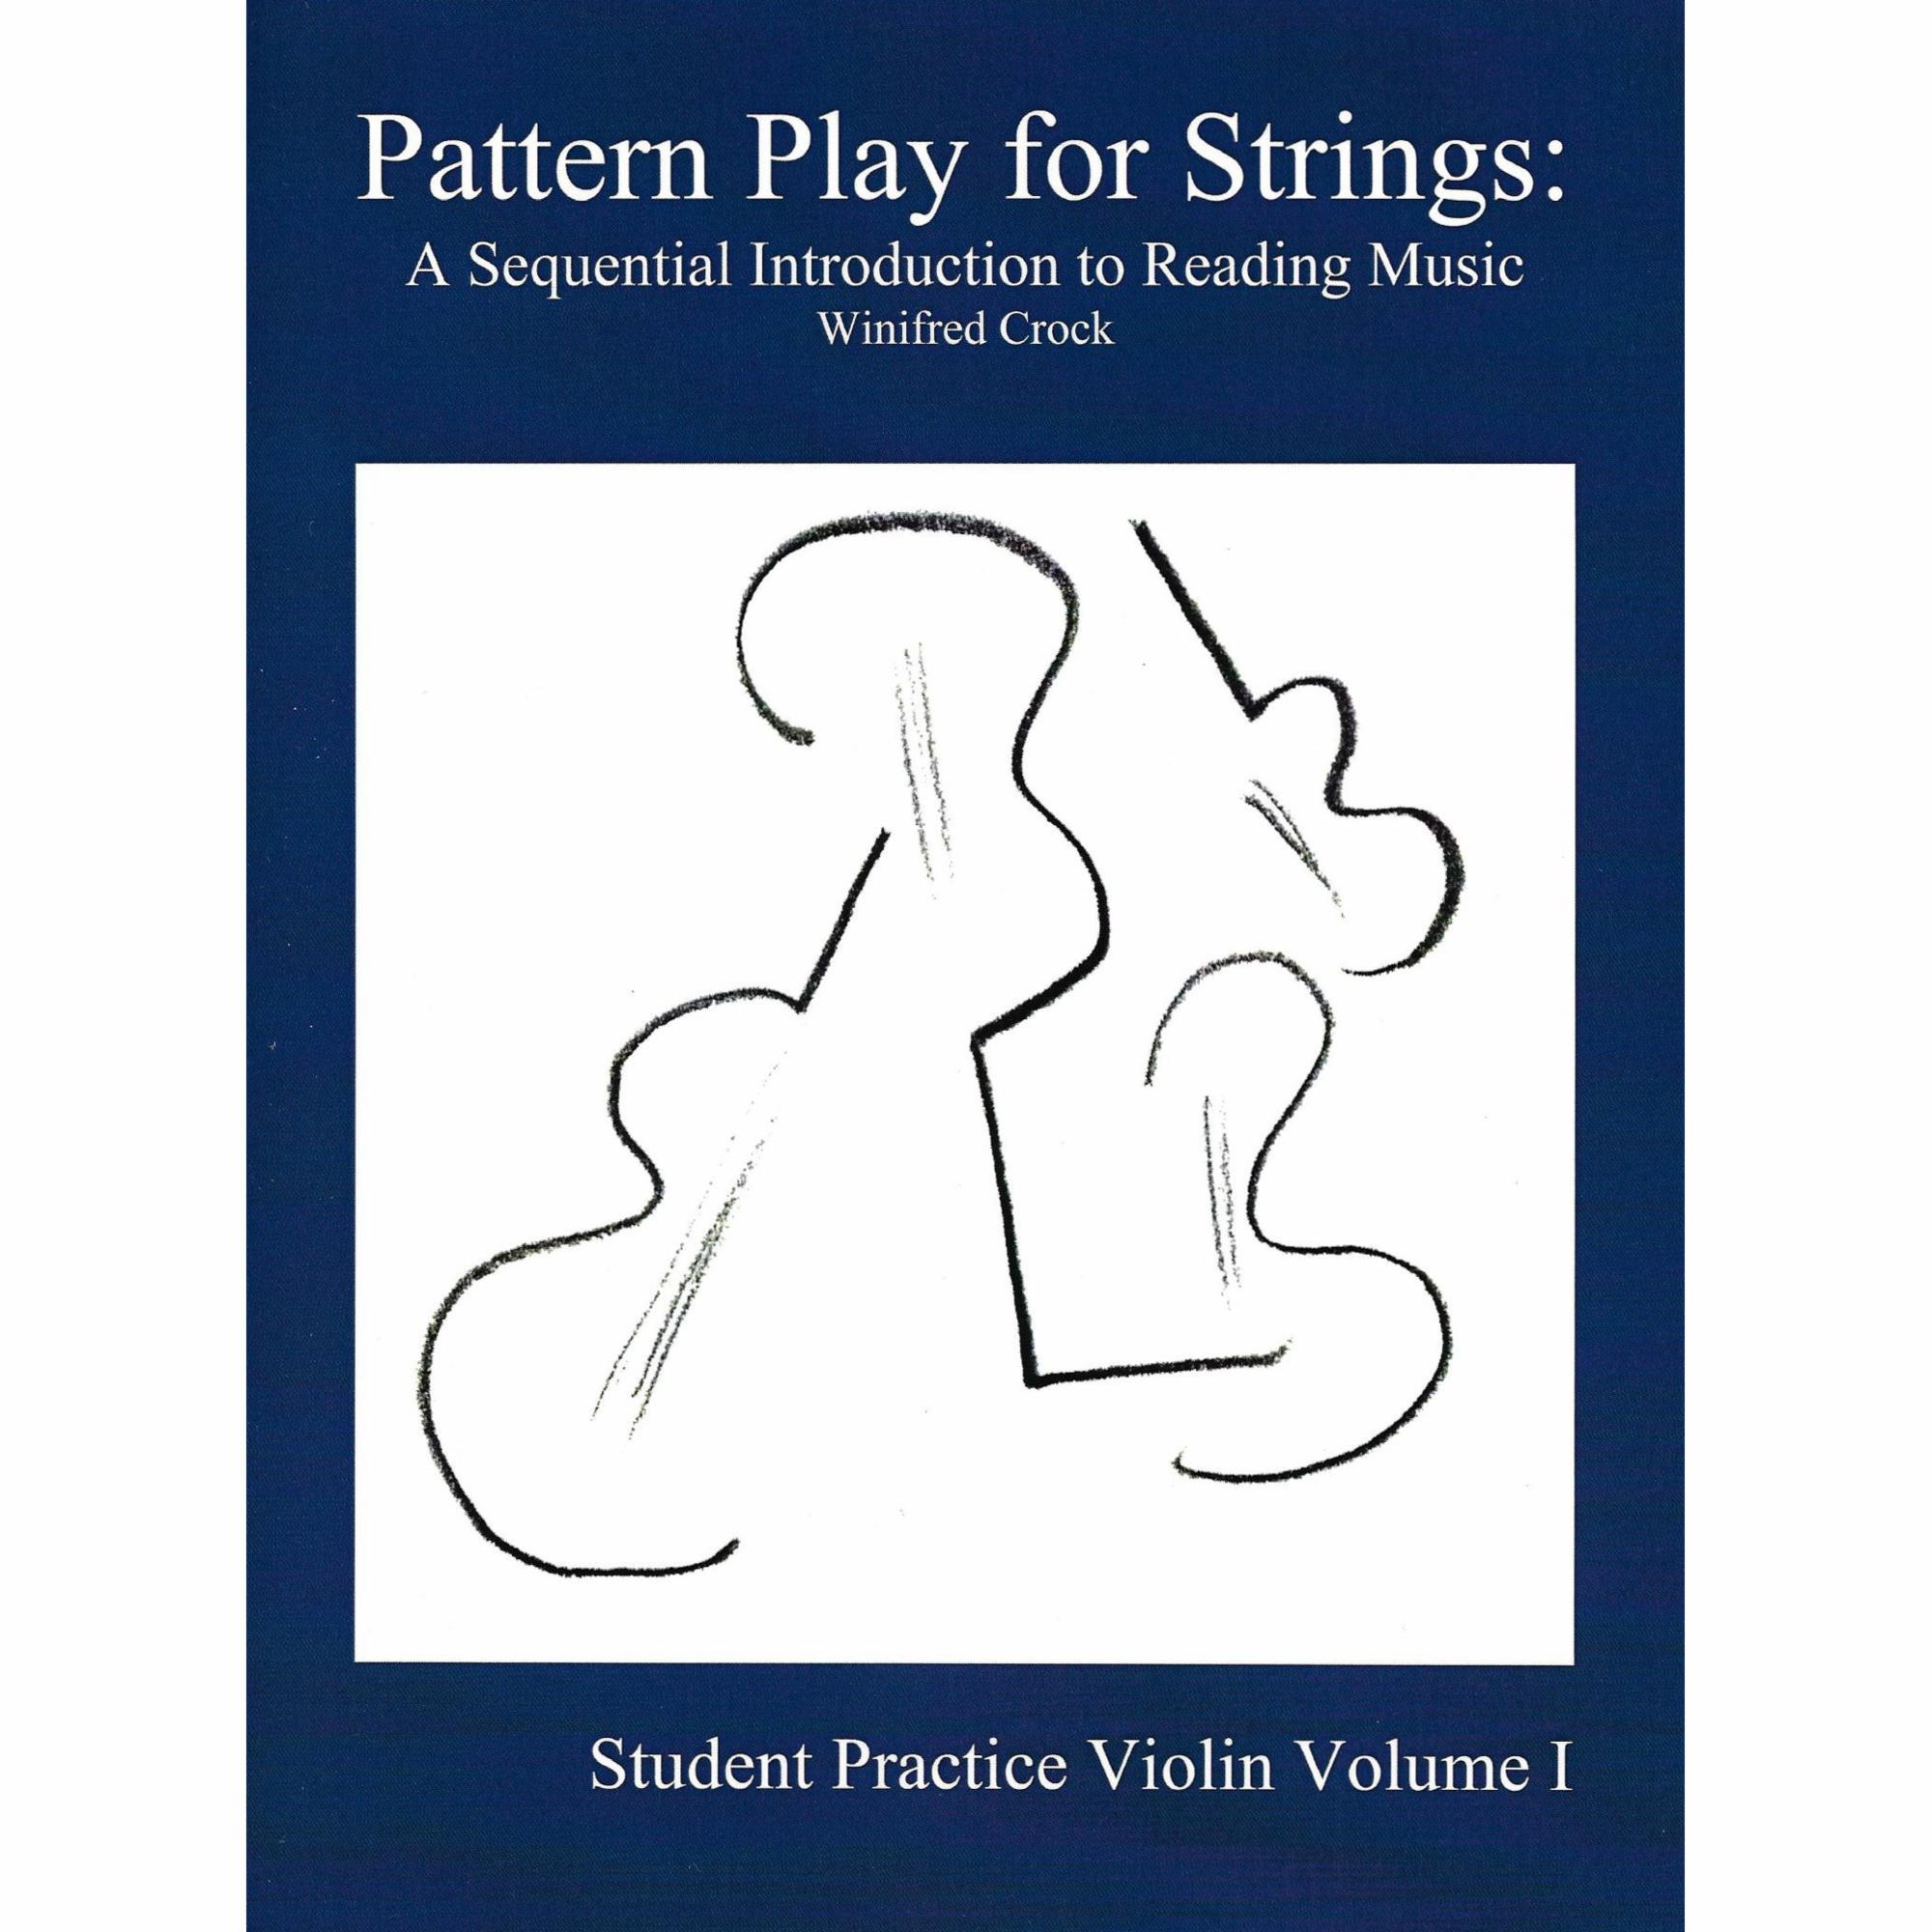 Pattern Play for Strings, Volume 1